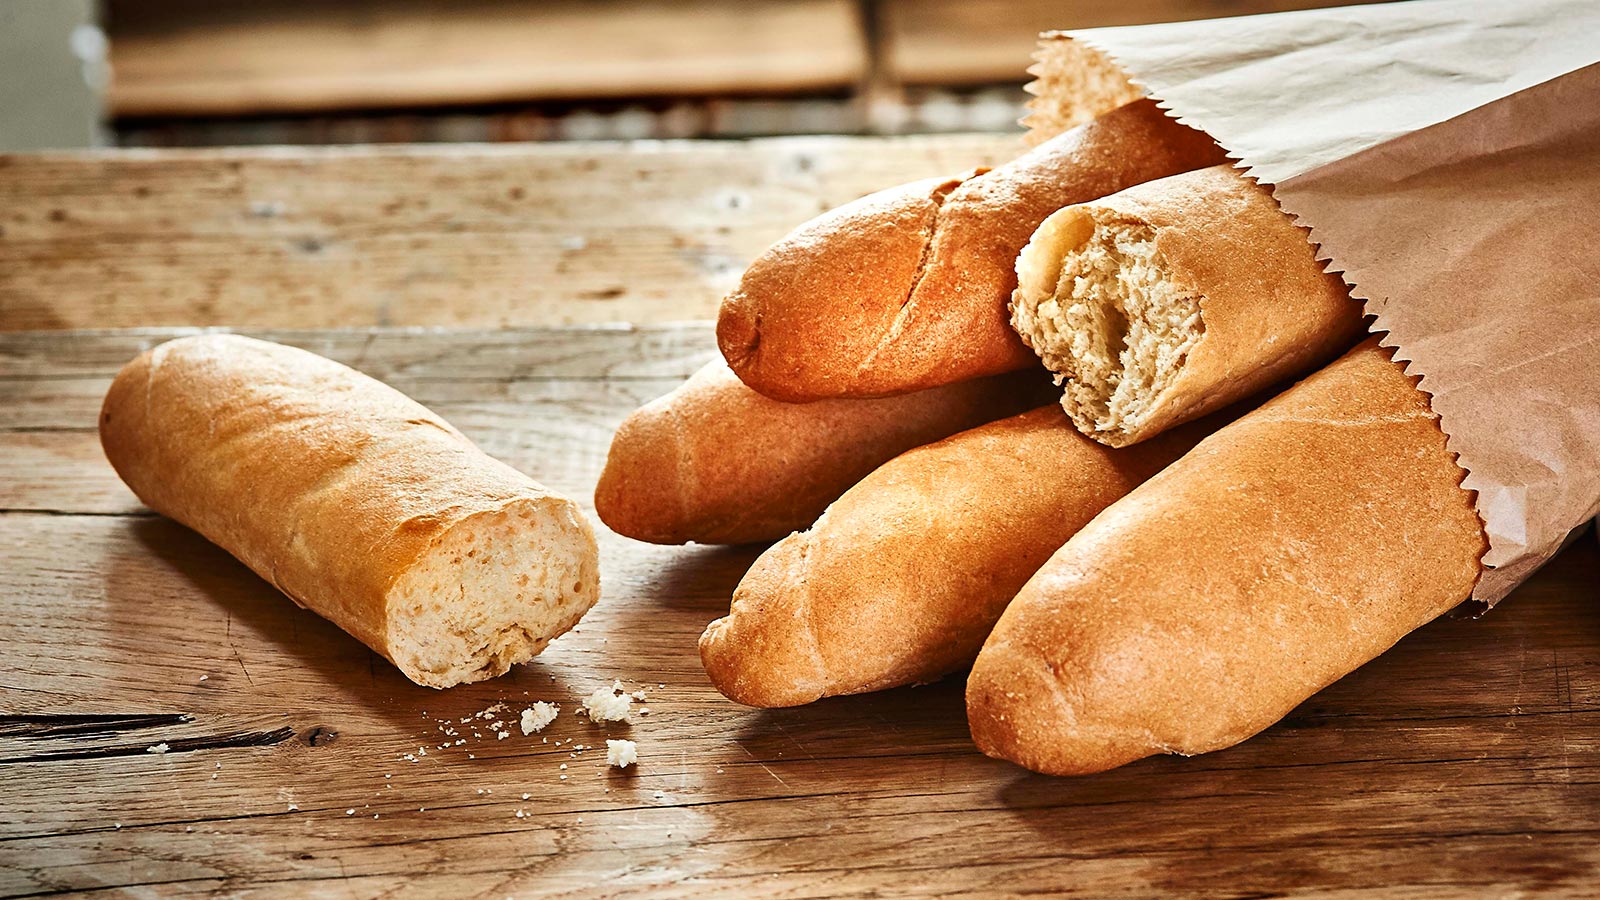 🍞 We’ll Honestly Be Impressed If You Can Spell the Names of These 15 Breads 🥖 Baguette